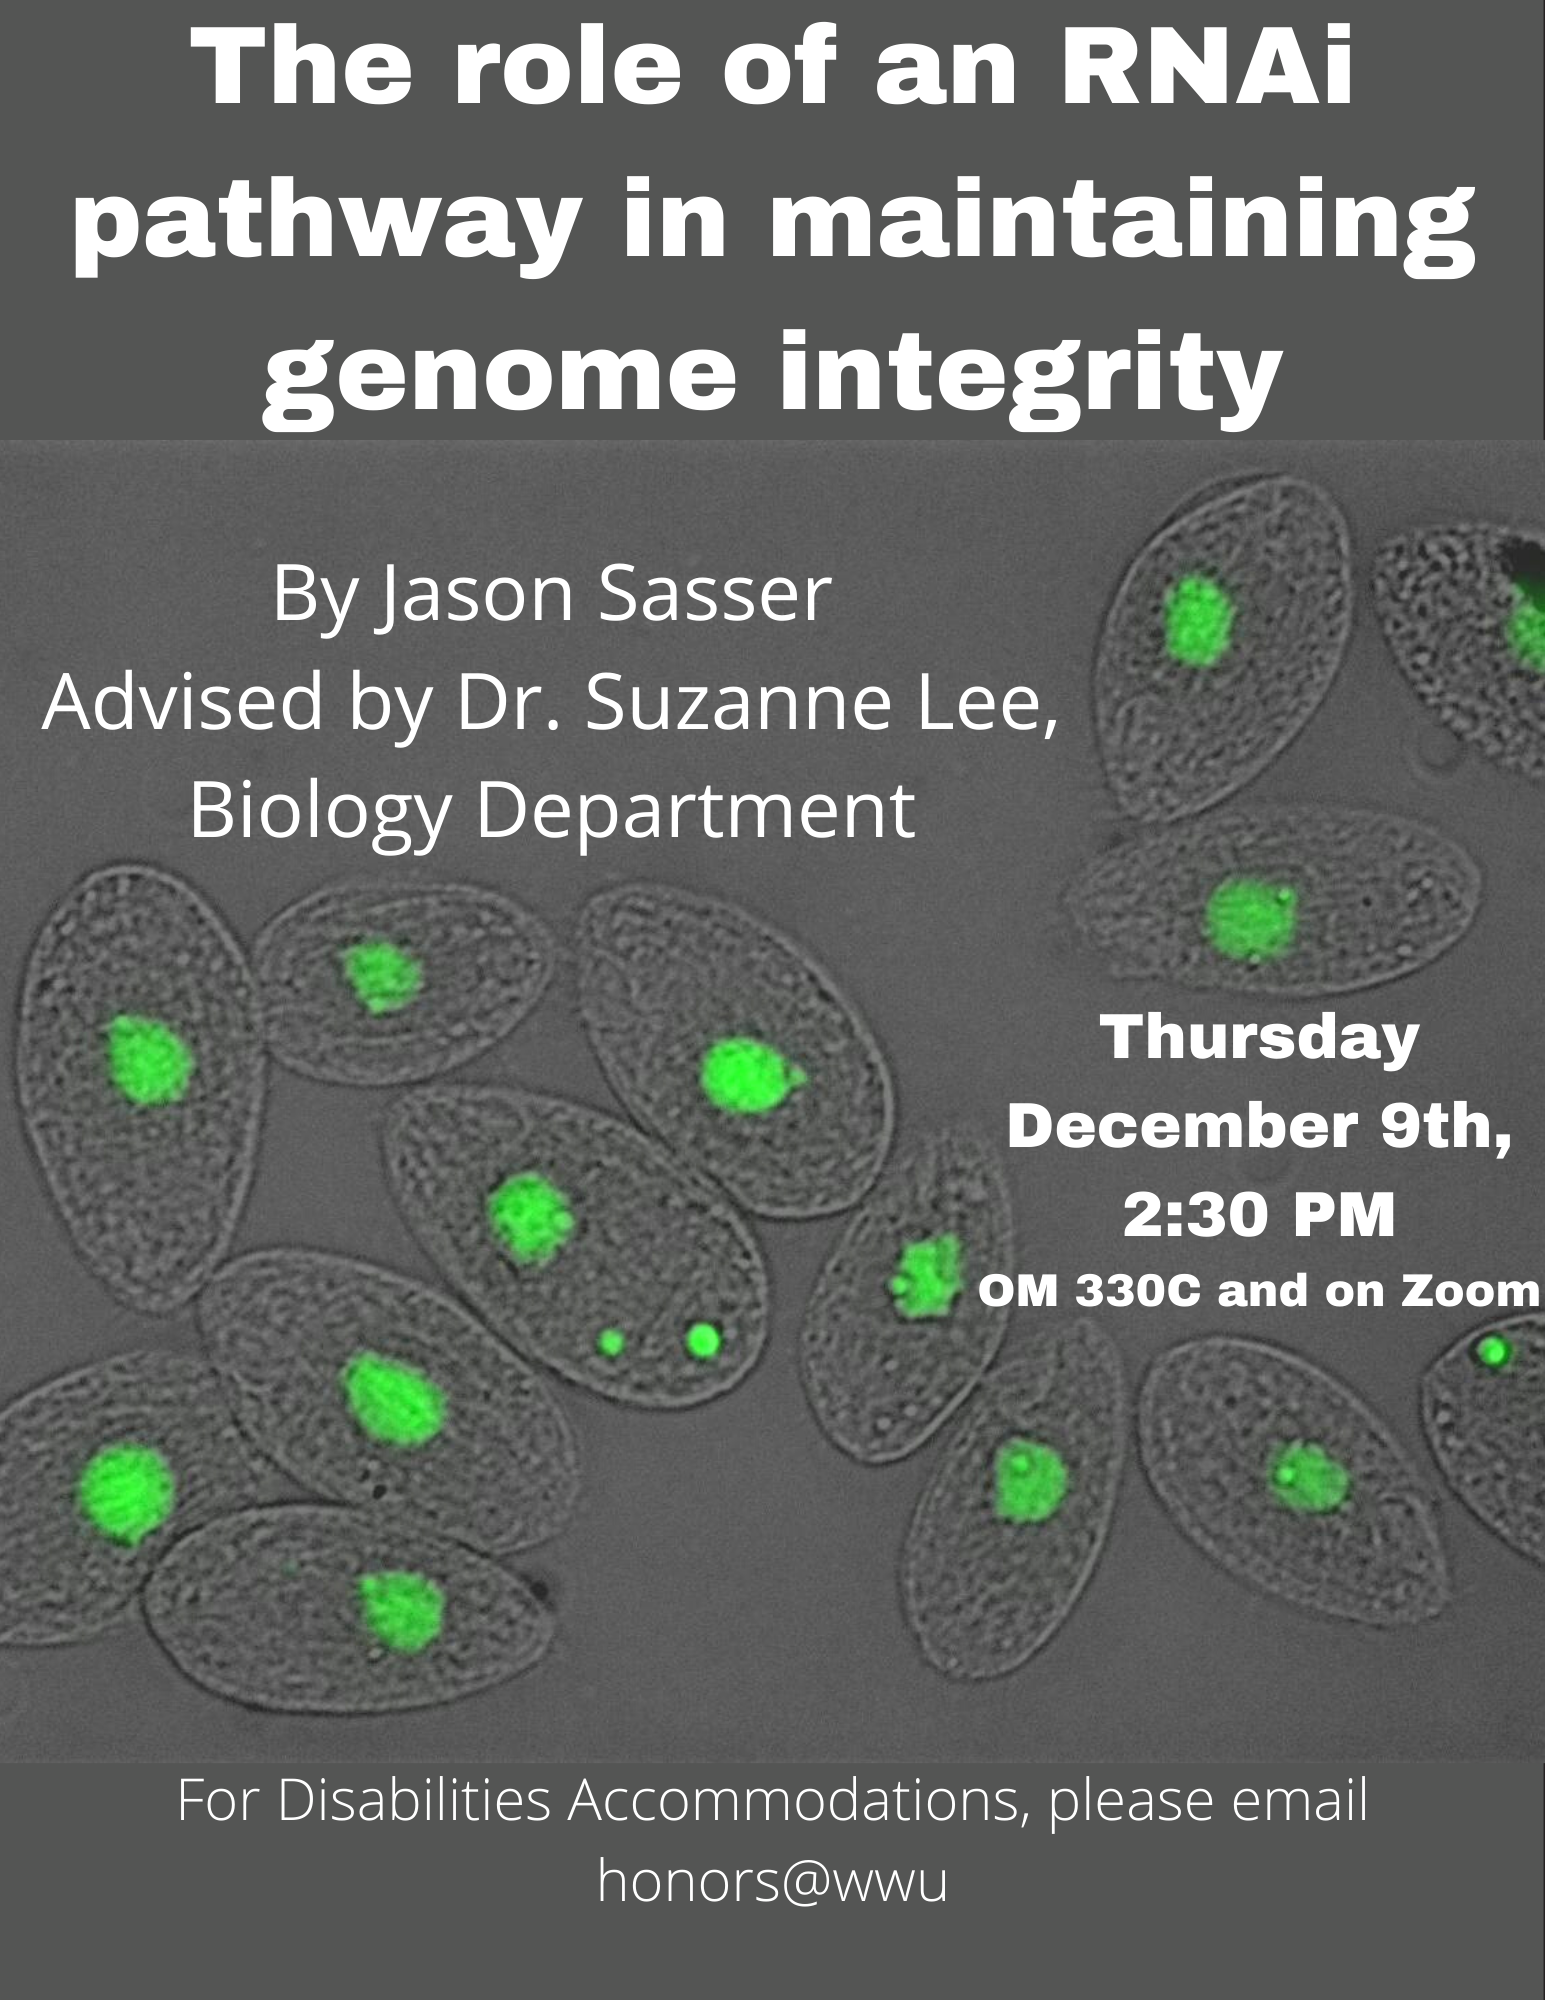 A grey poster with microscopic cells. The text reads: "The role of an RNAi pathway in maintaining genome integrity. By Jason Sasser. Advised by Dr. Suzanne Lee, Biology Department. Thursday December 9th, 2:30 pm in OM330C and on Zoom. For disability accommodations please email honors@wwu.edu"